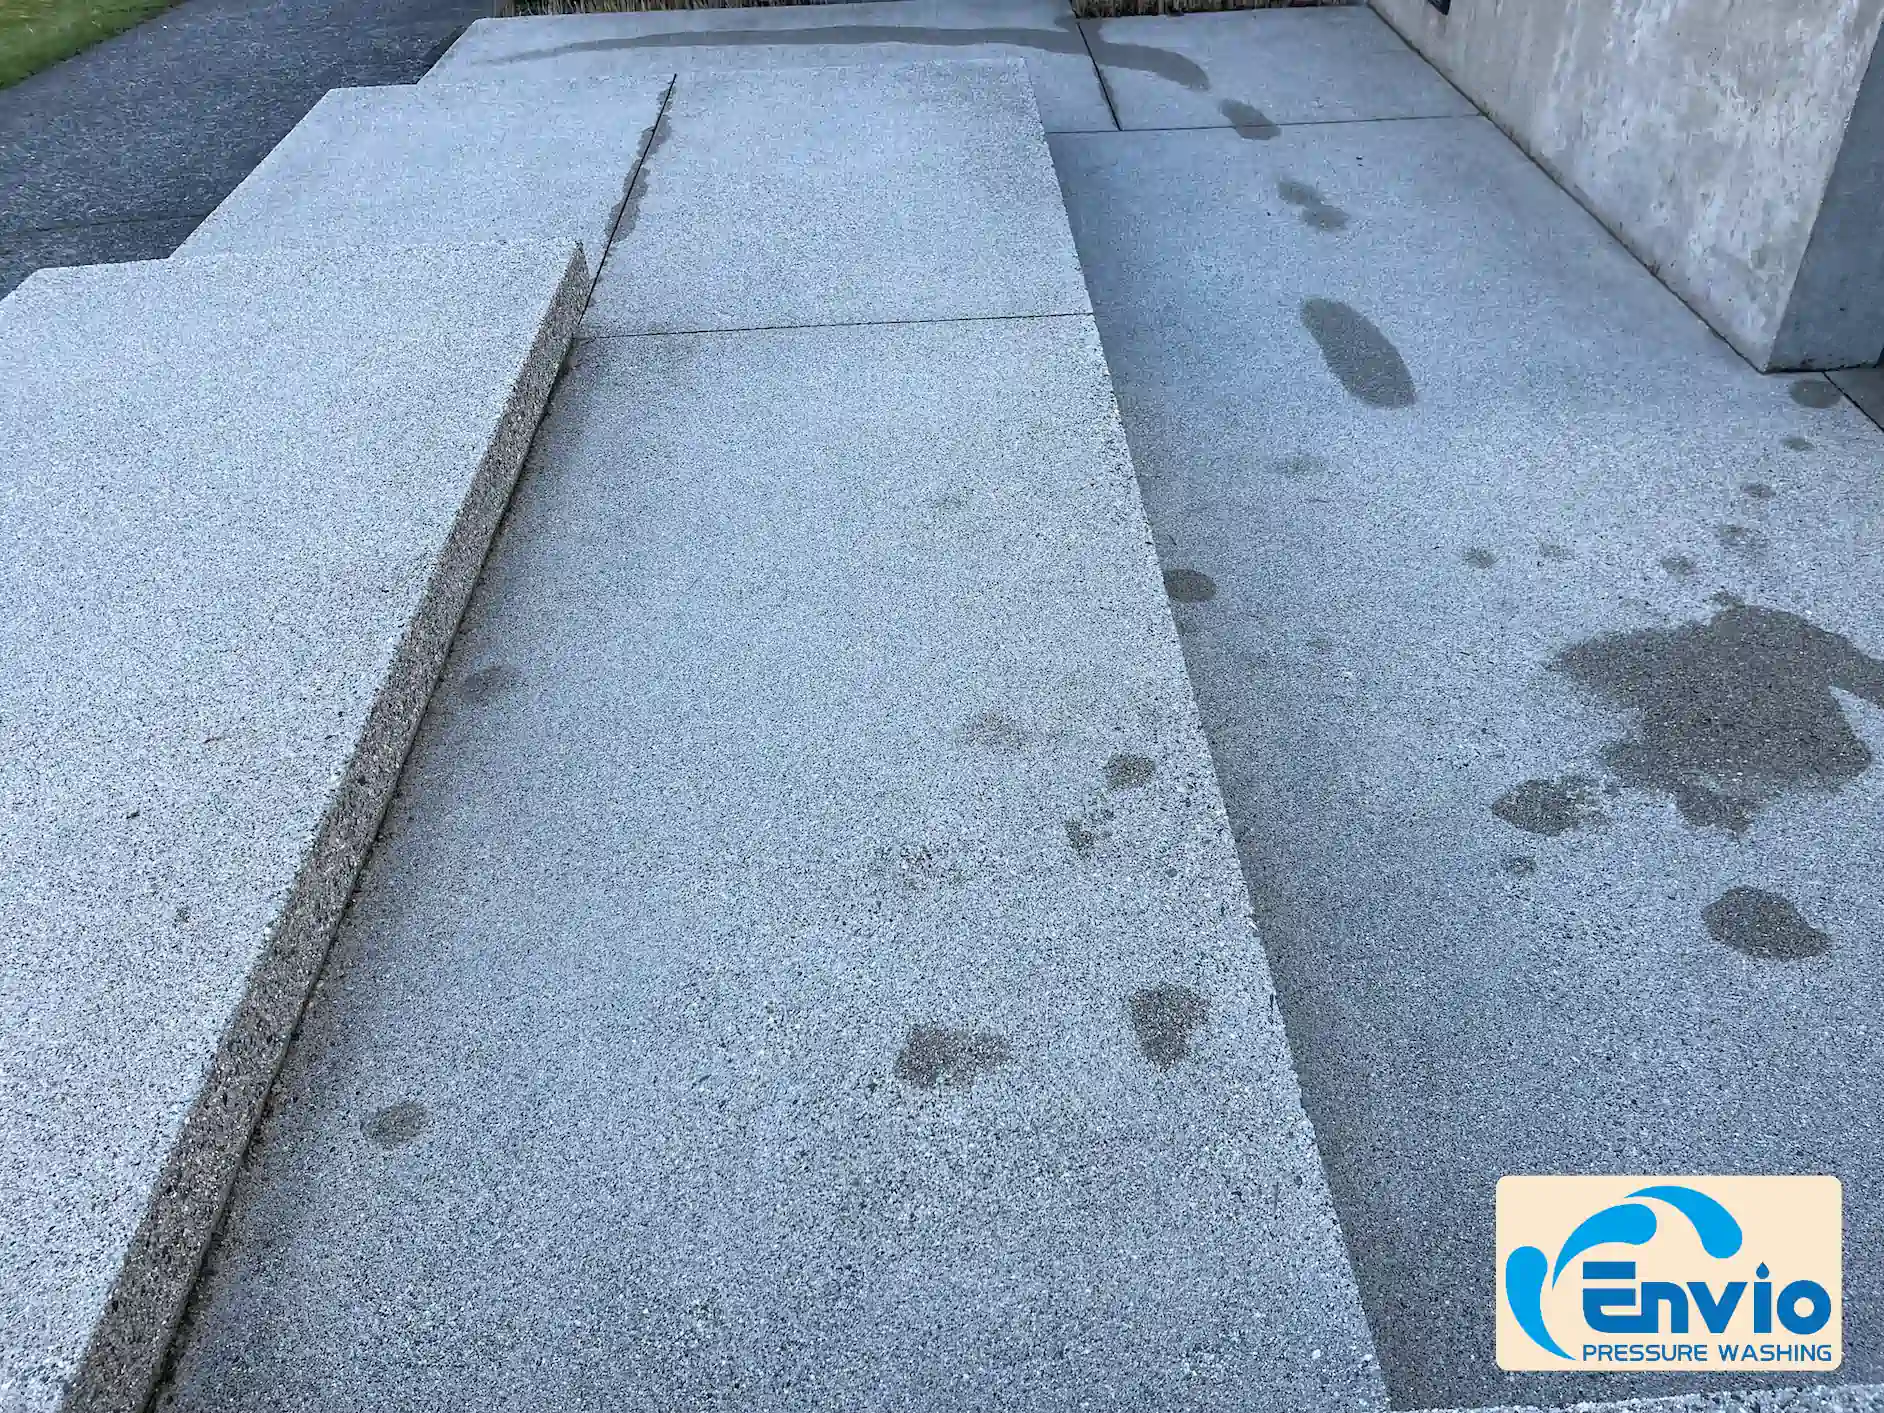 Badly cleaned concrete after